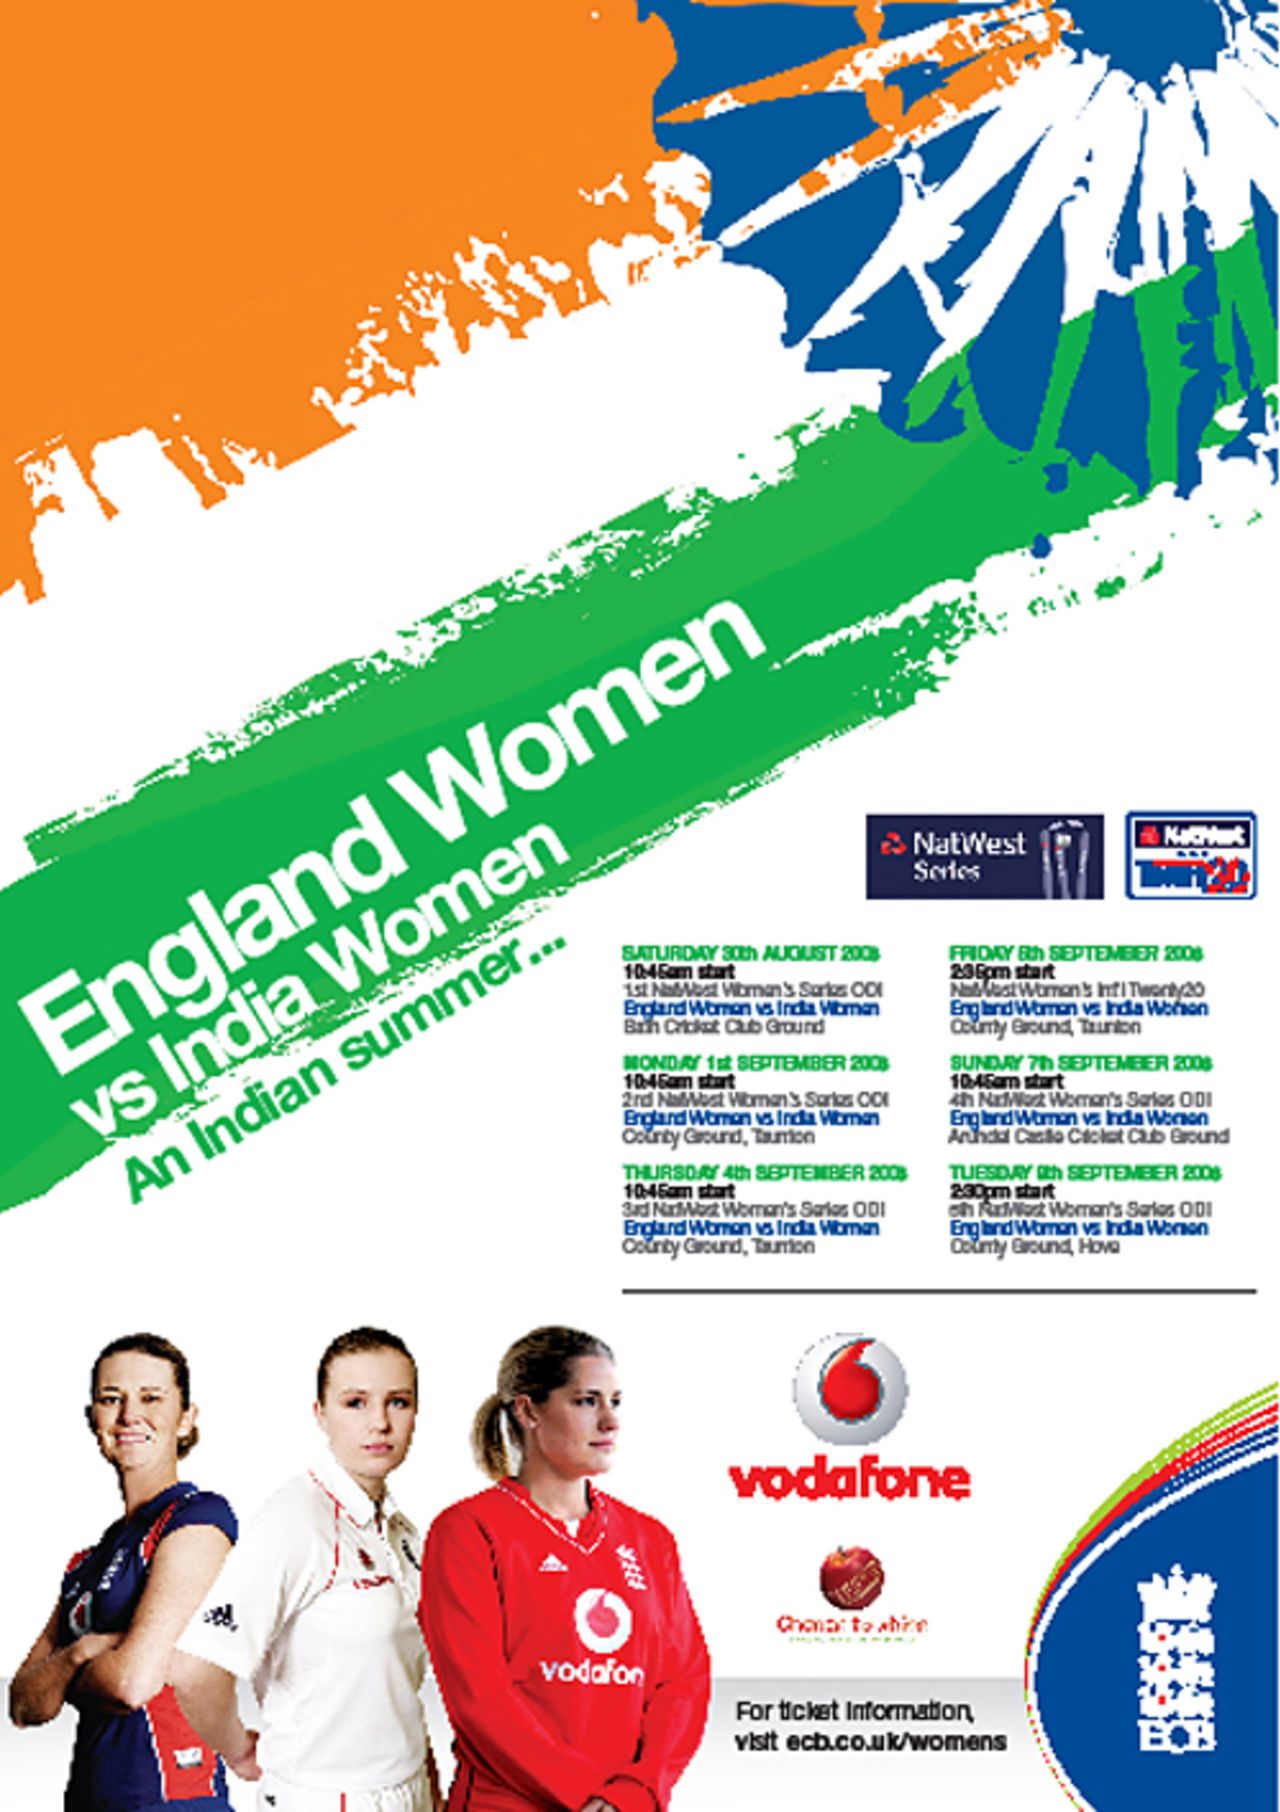 England women's poster for their series against India, featuring Charlotte Edwards, Holly Colvin and Katherine Brunt